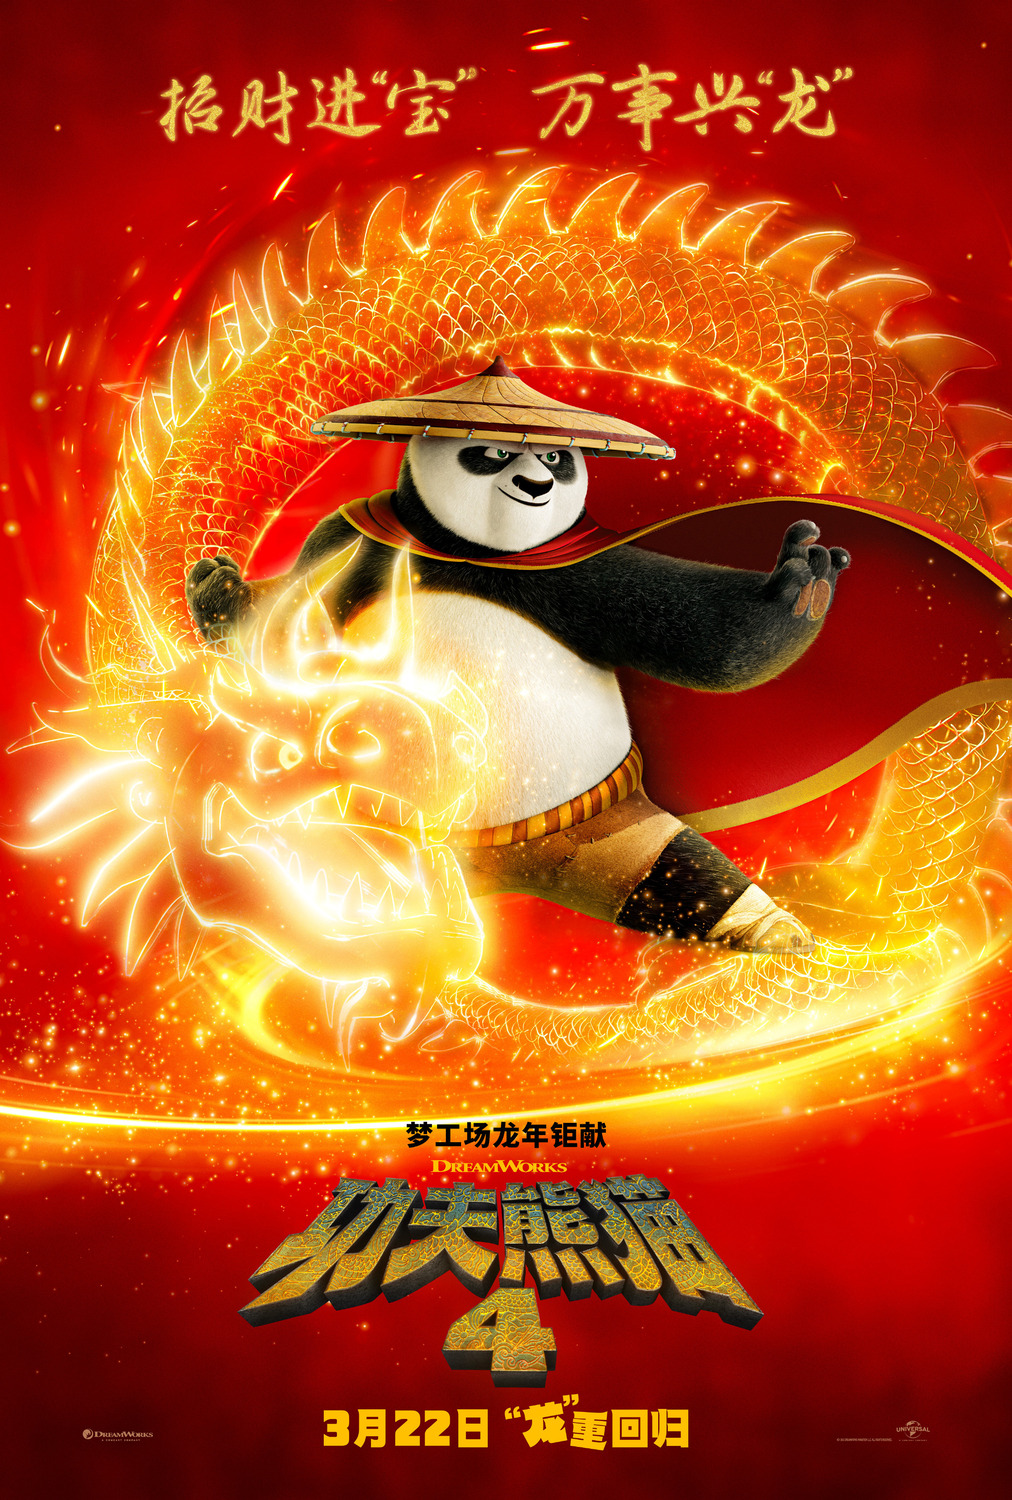 Extra Large Movie Poster Image for Kung Fu Panda 4 (#11 of 20)